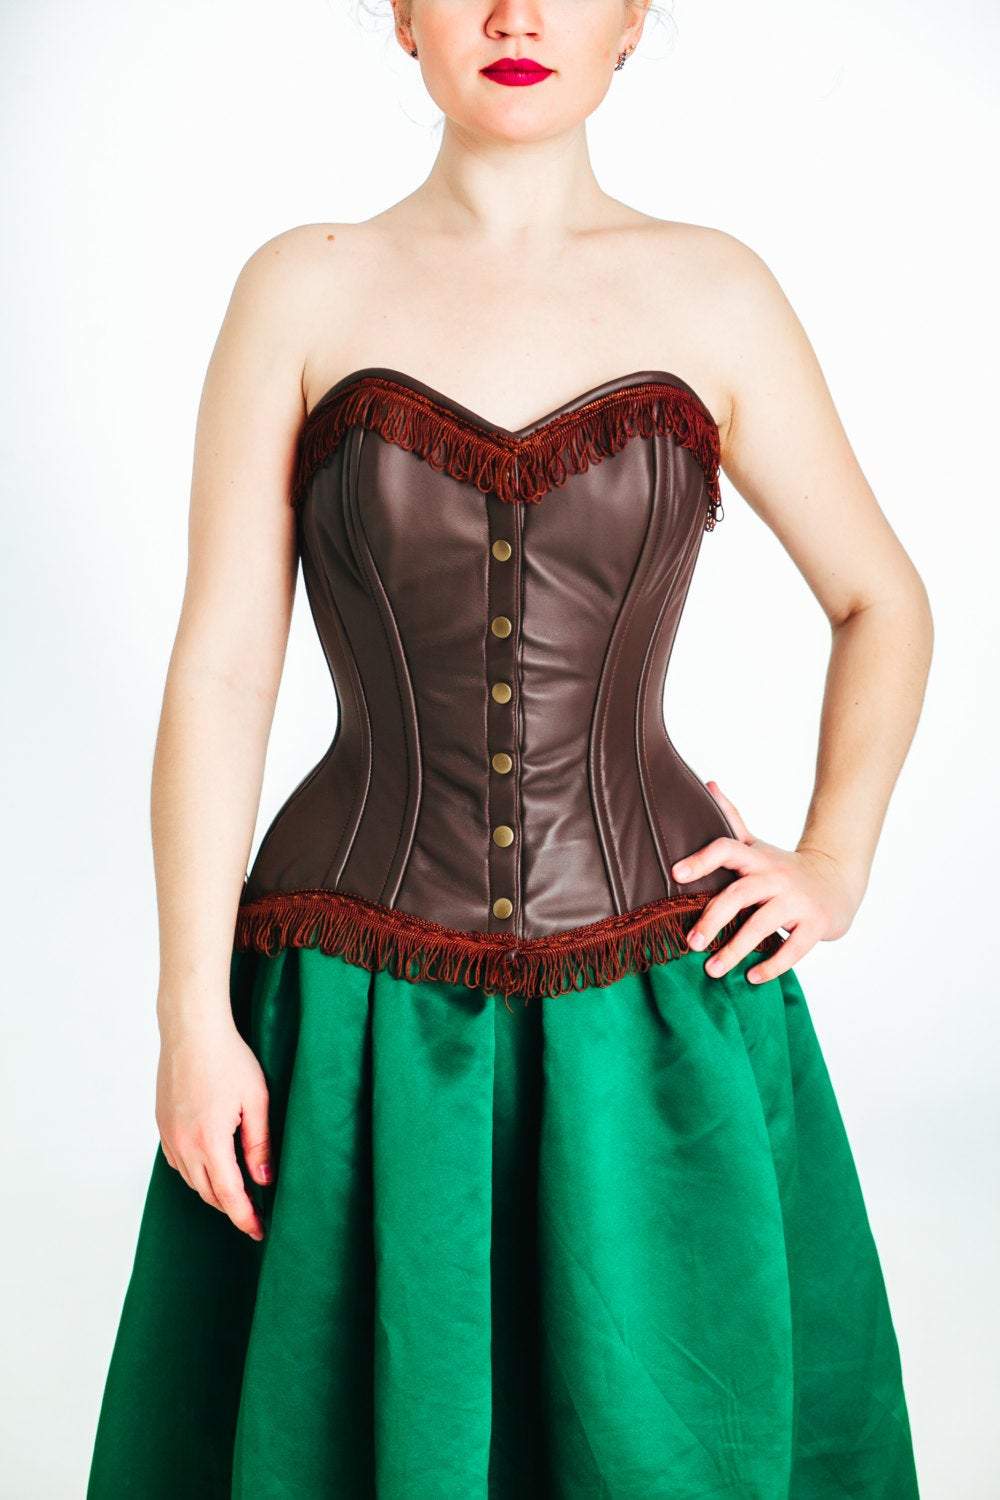 The best brown leather corsets